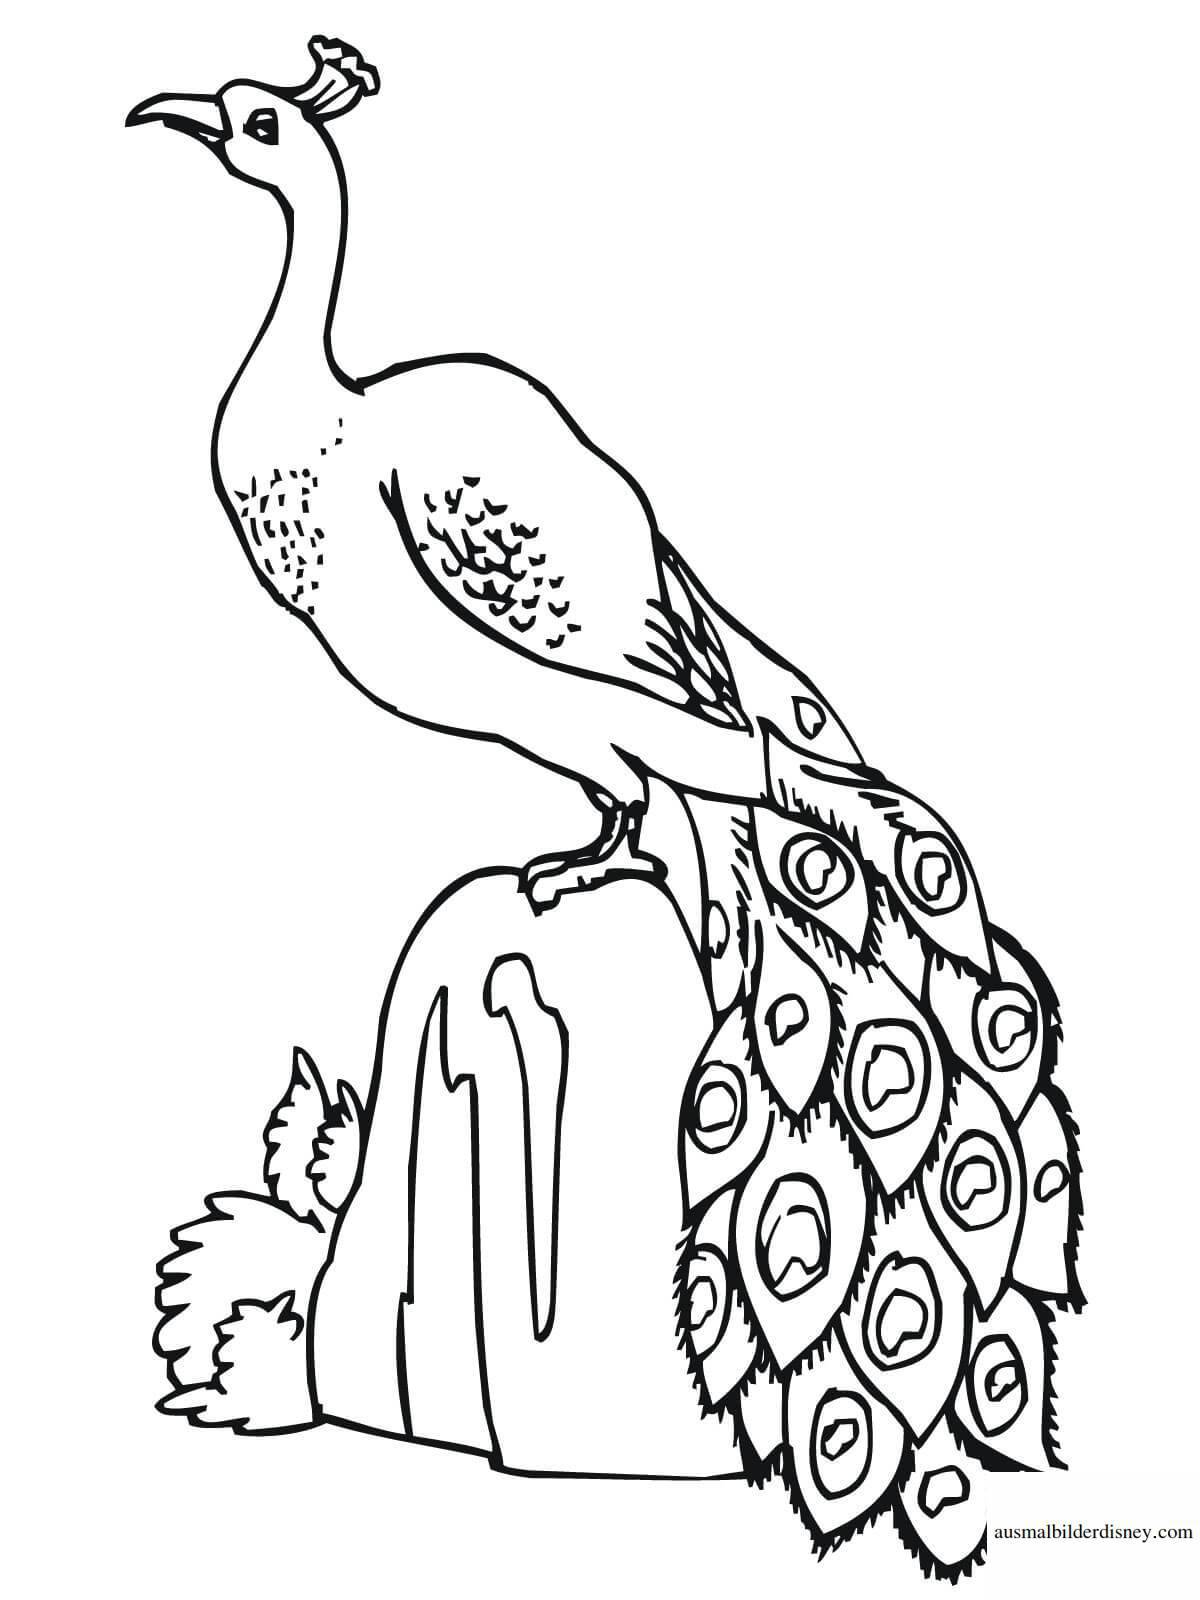 A funny peacock coloring book for kids